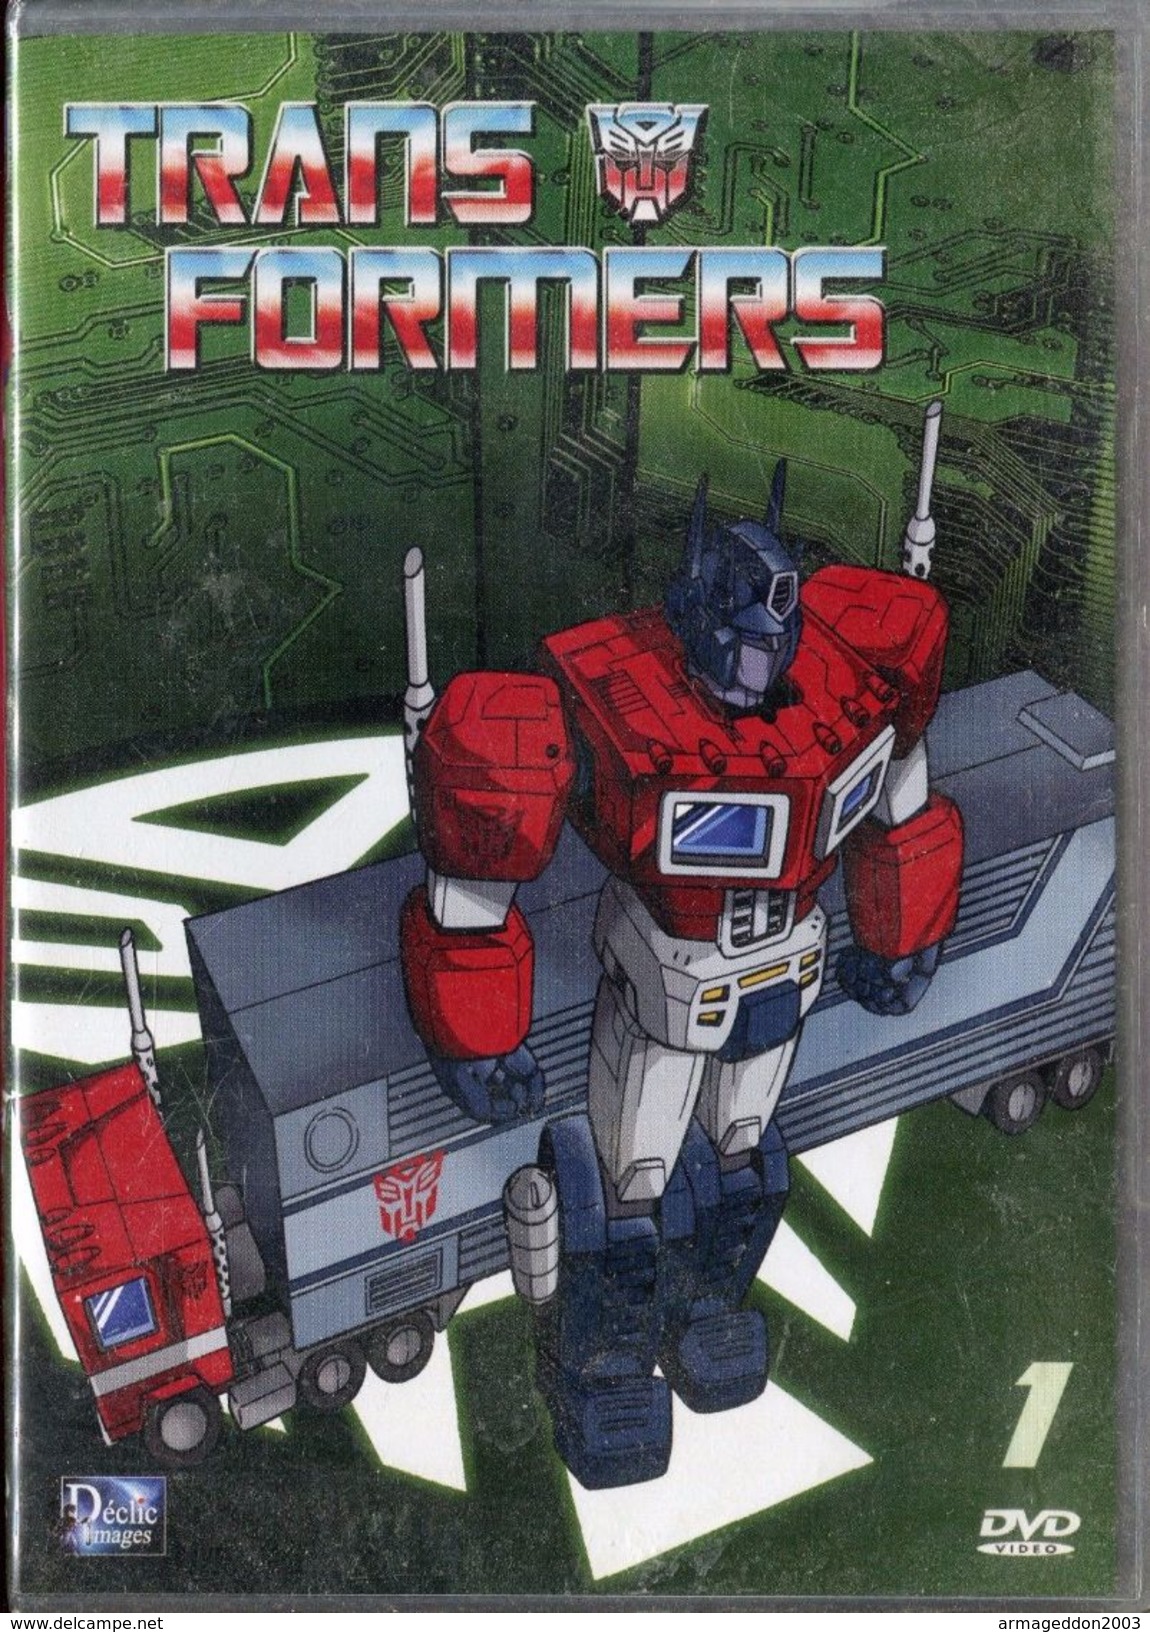 DVD TRANSFORMER VOL 1 / 75 MINUTES - NEUF SOUS BLISTER - Animation